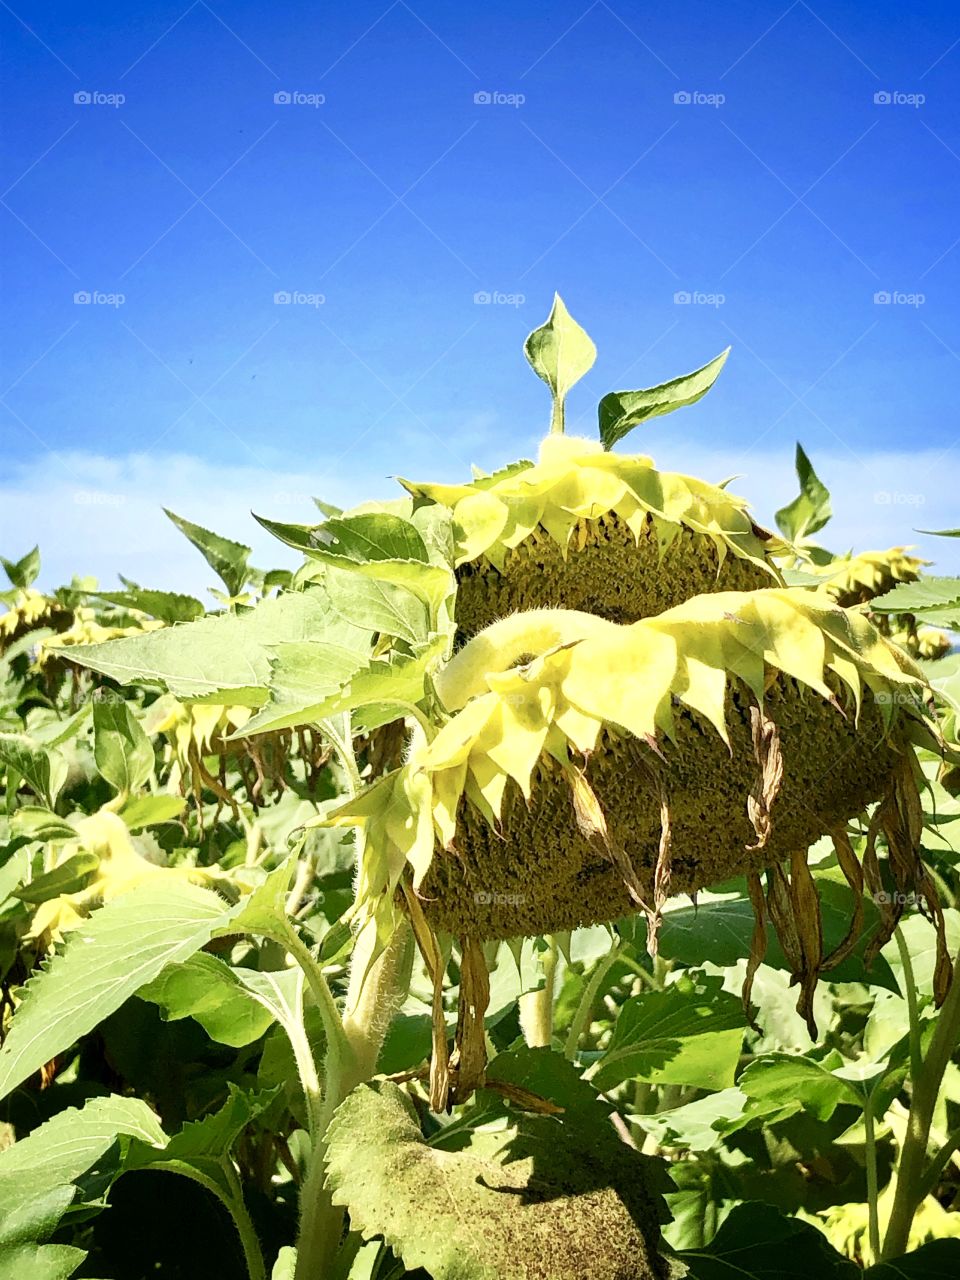 Ready to be harvested sunflower seeds farm field blue sky background 